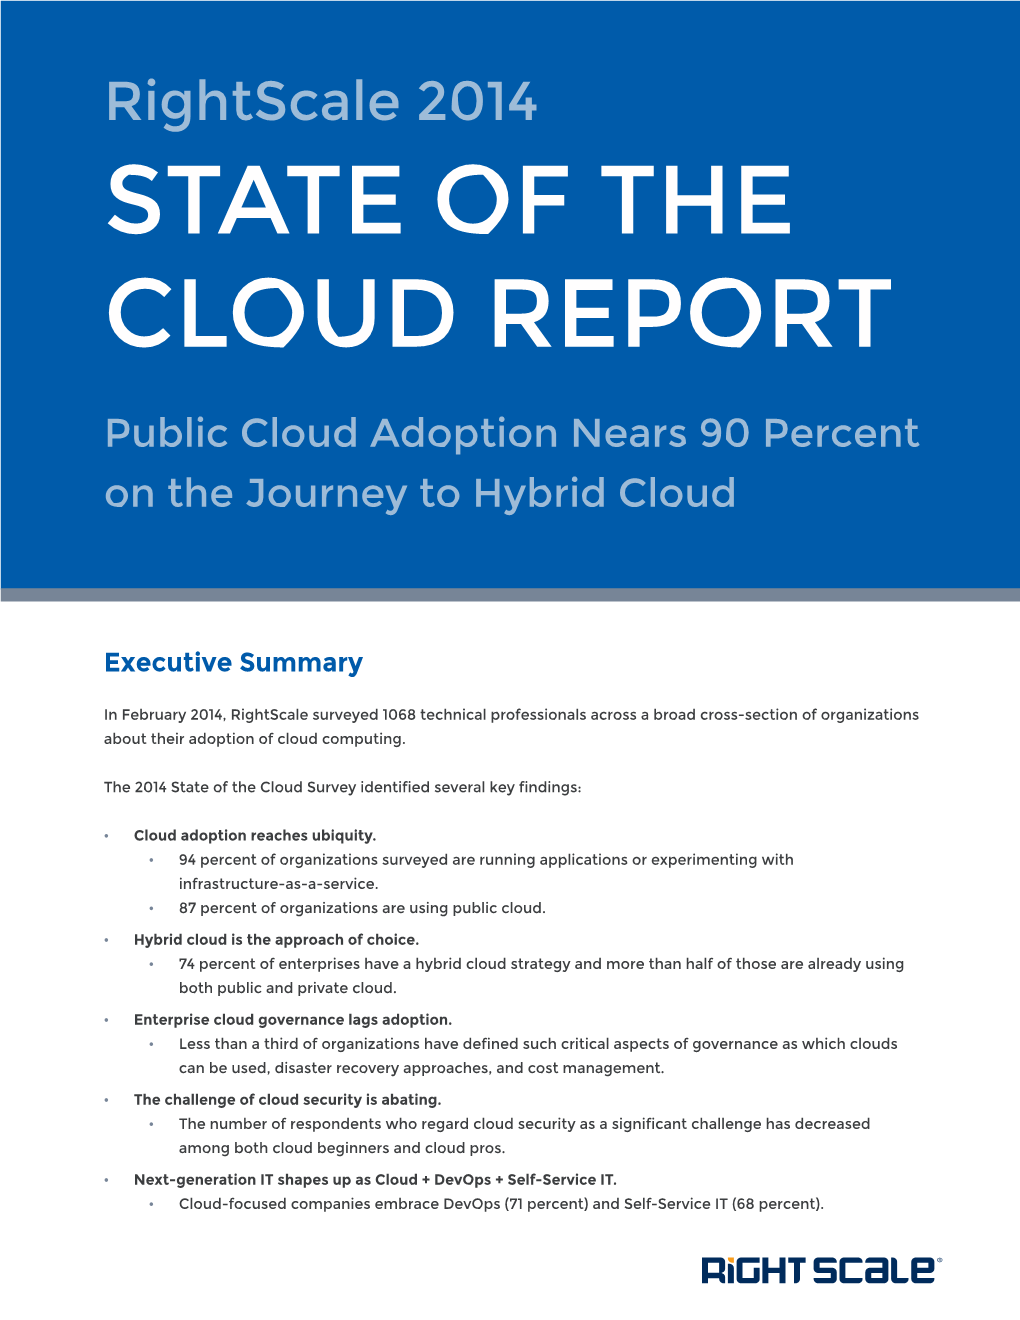 Rightscale 2014 STATE of the CLOUD REPORT